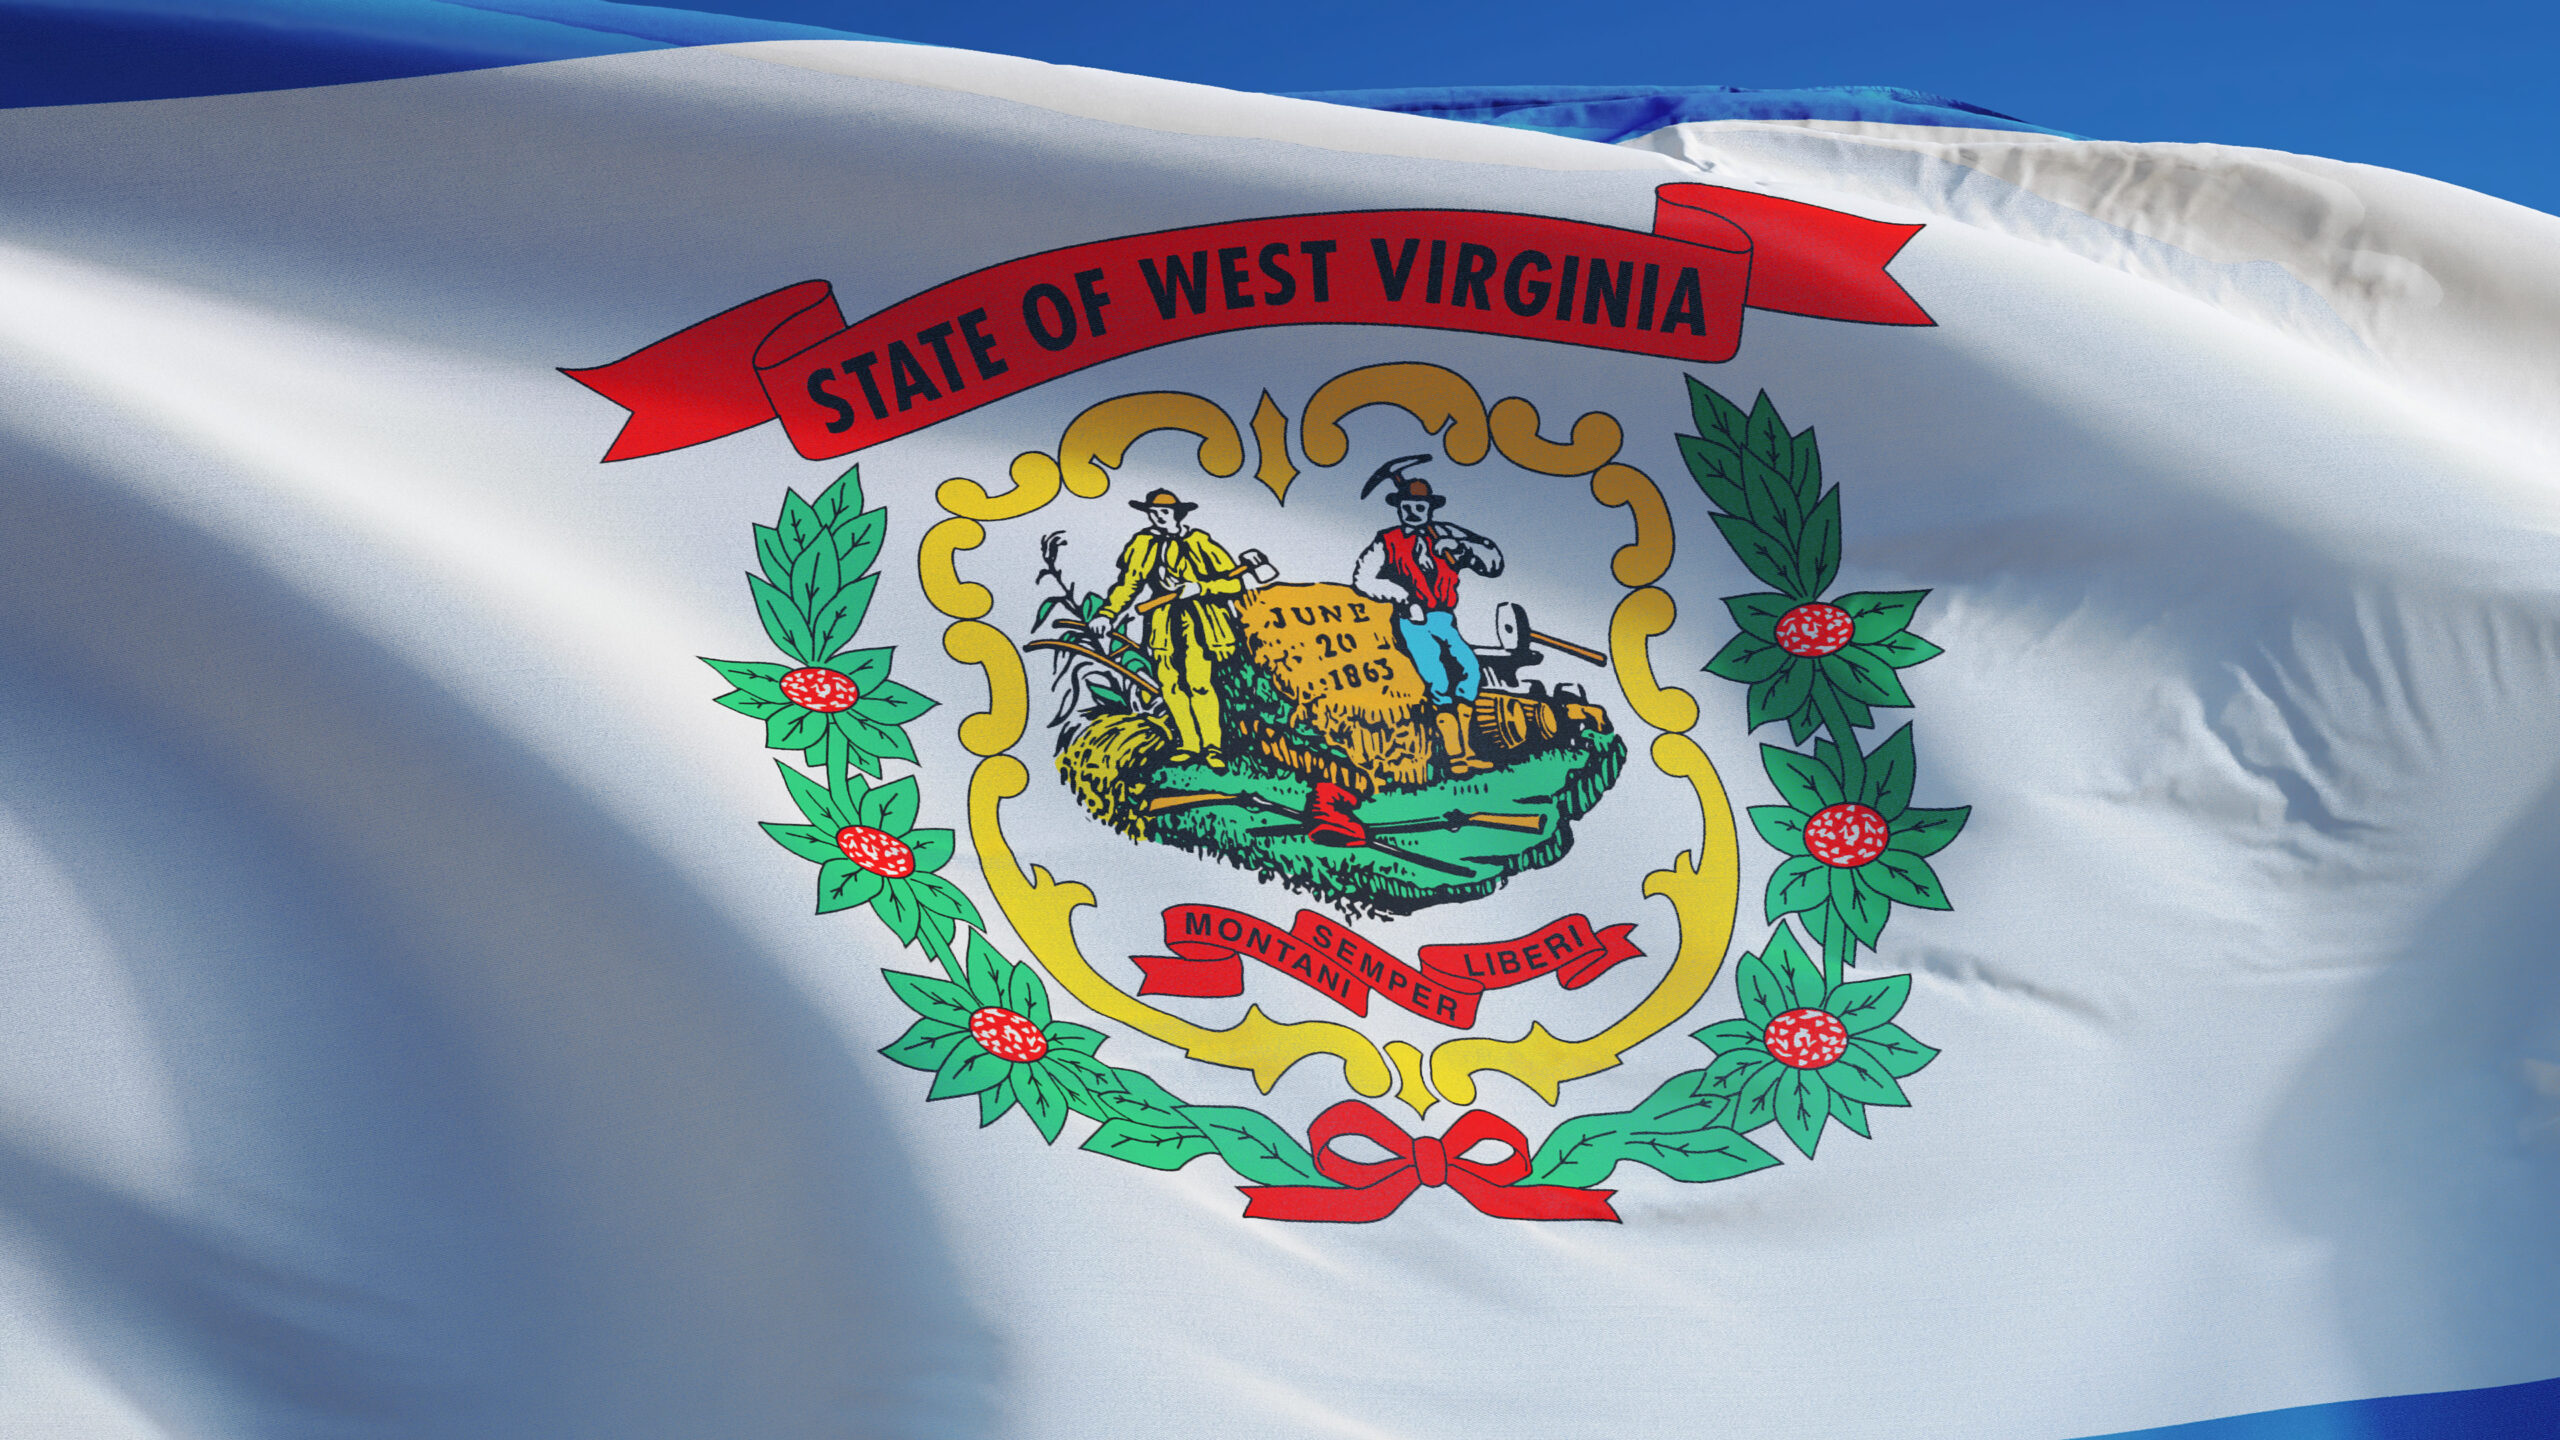 Concealed carry reciprocity agreement reached between wisconsin and west virginia